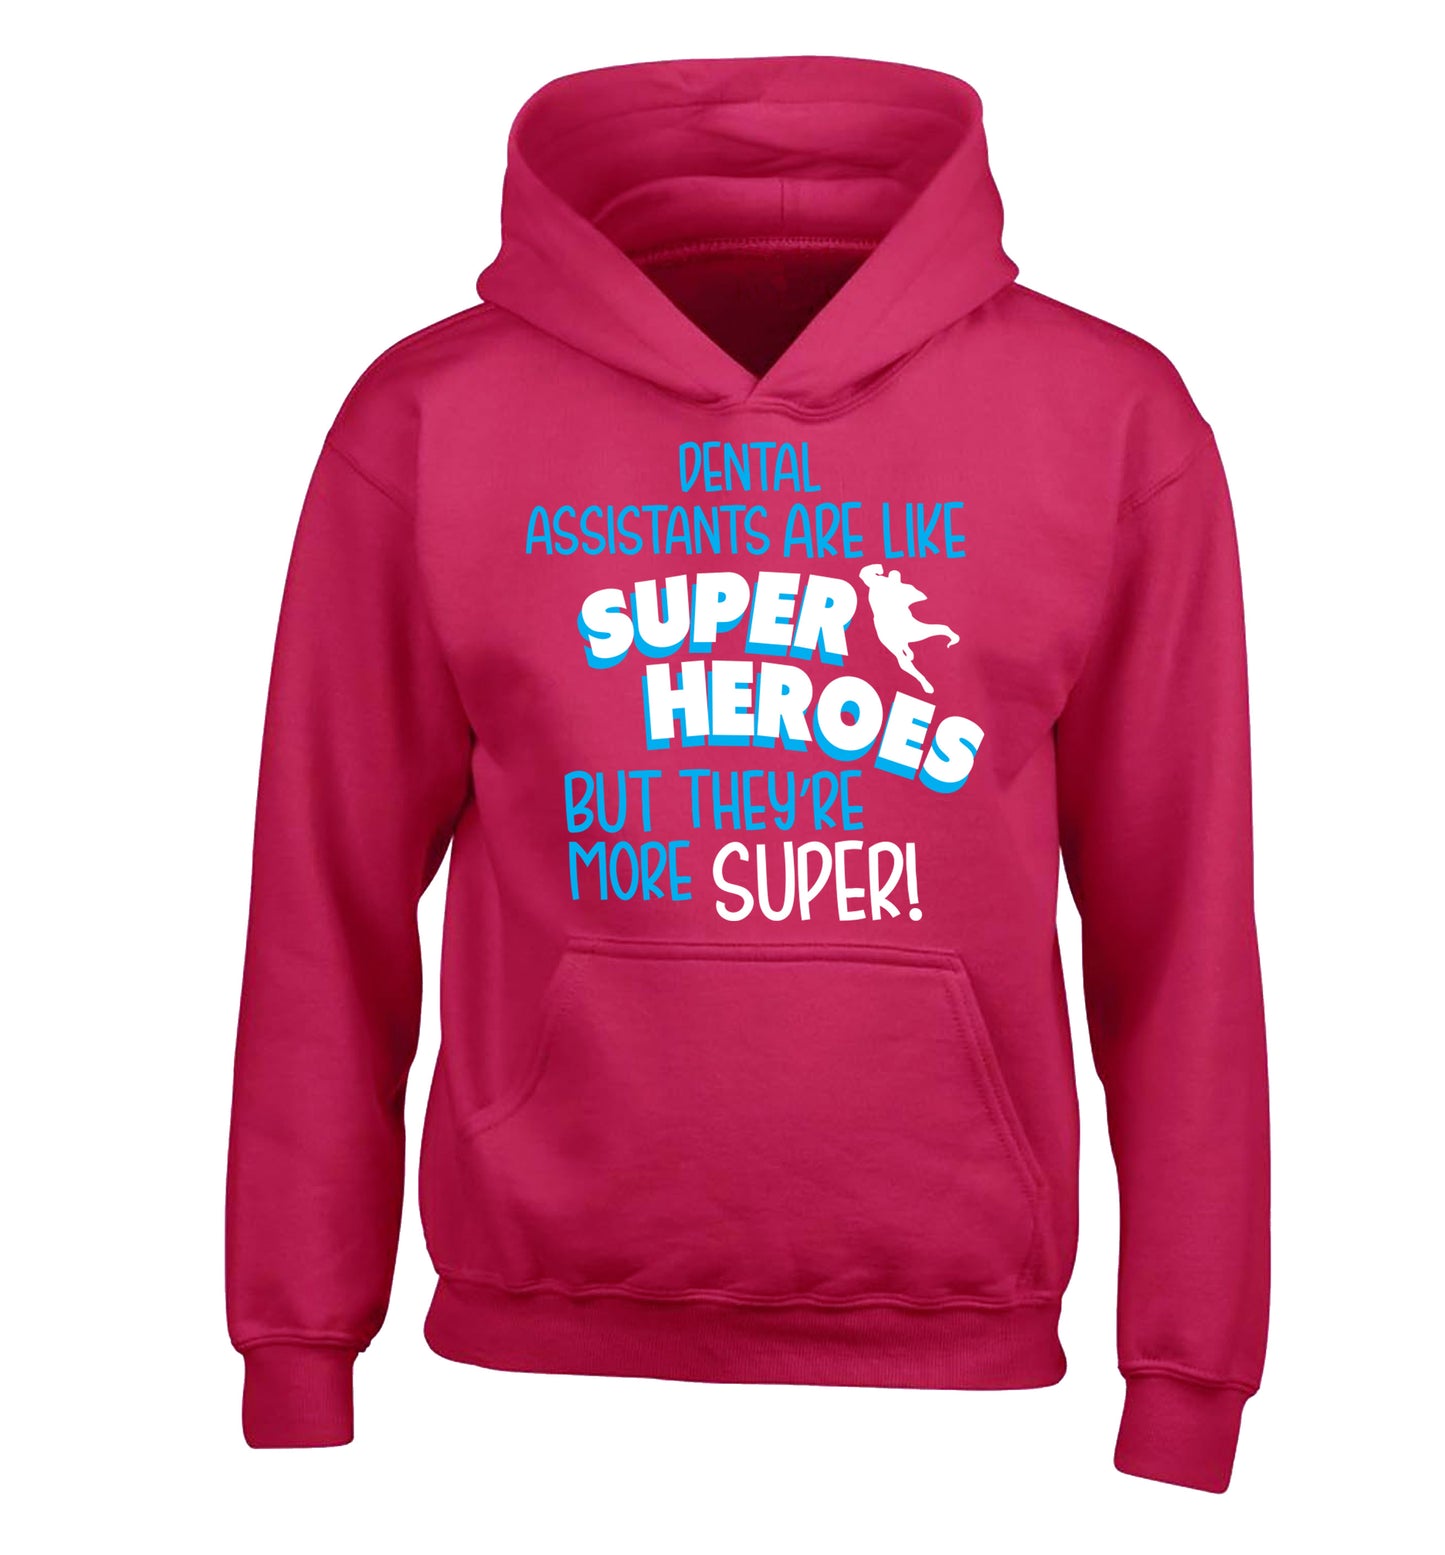 Dental Assistants are like superheros but they're more super children's pink hoodie 12-13 Years